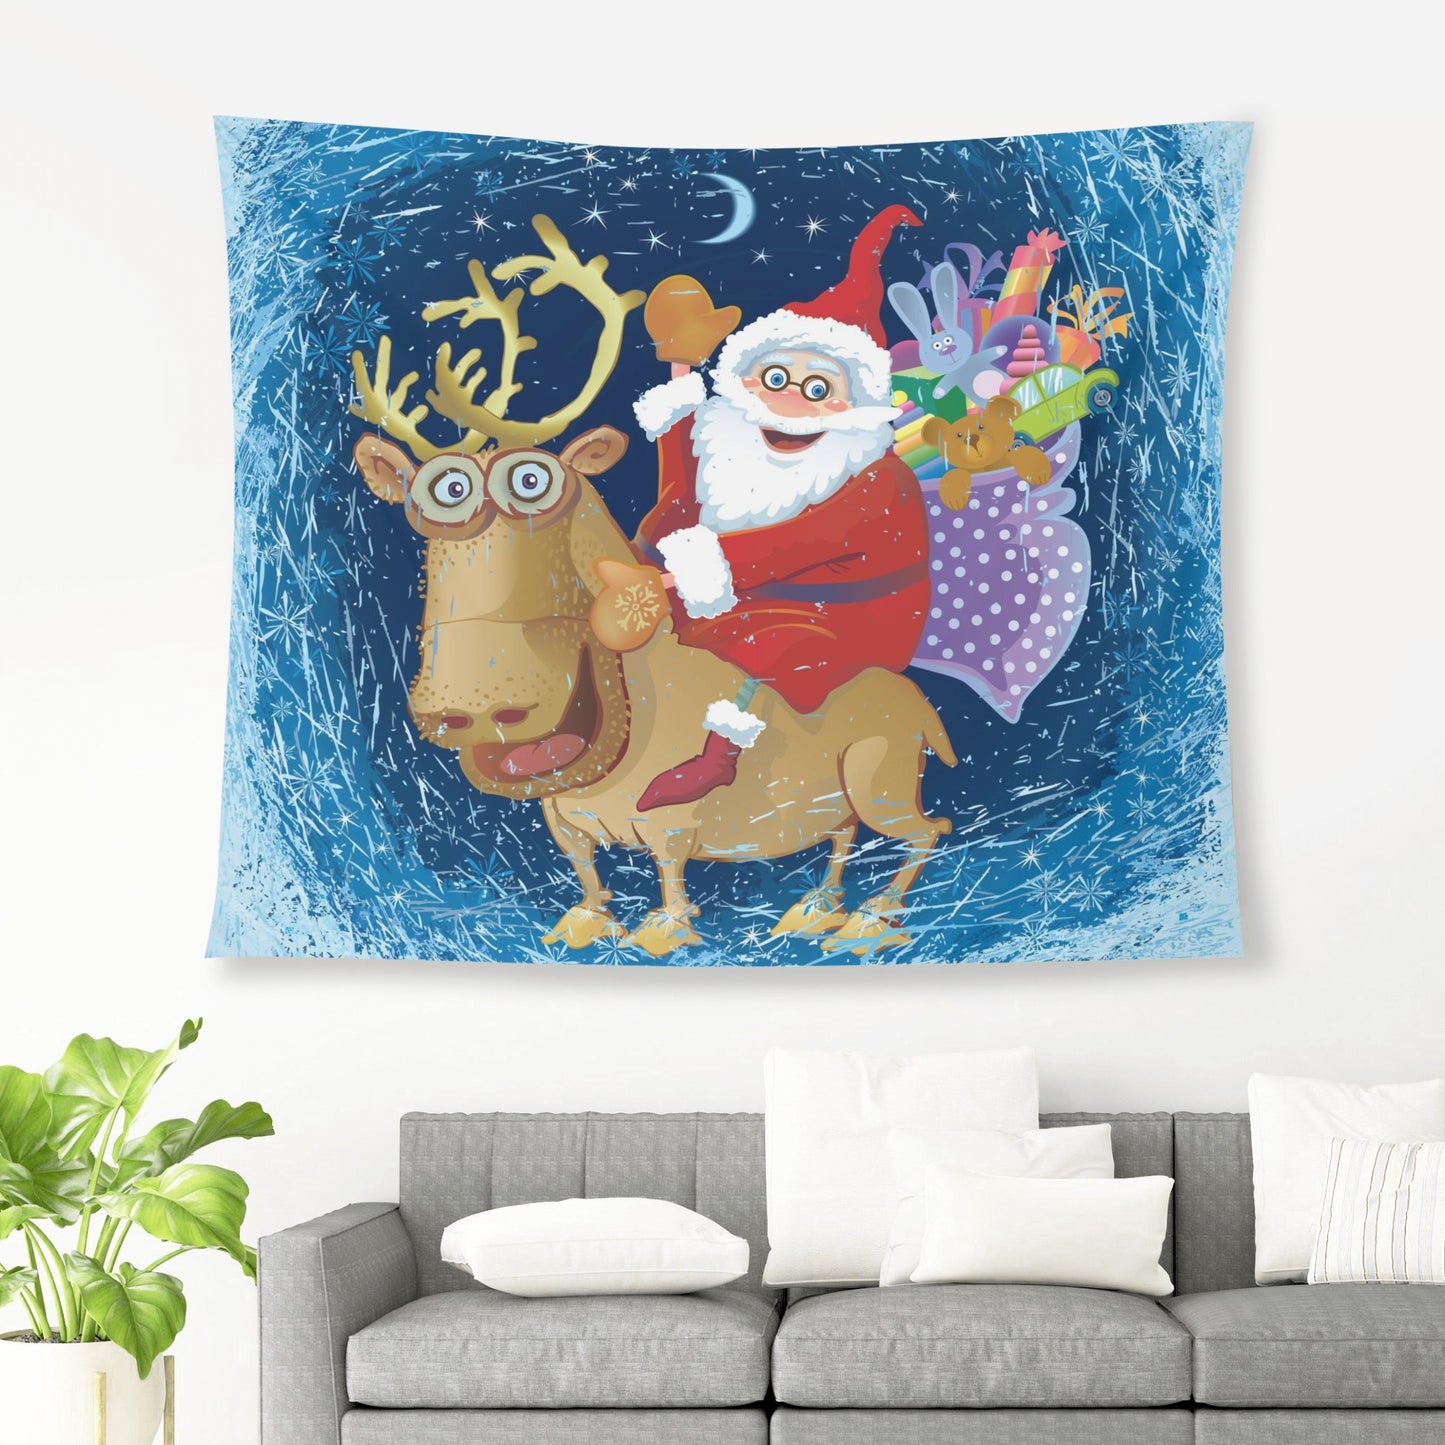 Santa Rode The Reindeer With This Polyester Peach Skin Wall Tapestry 6 Sizes